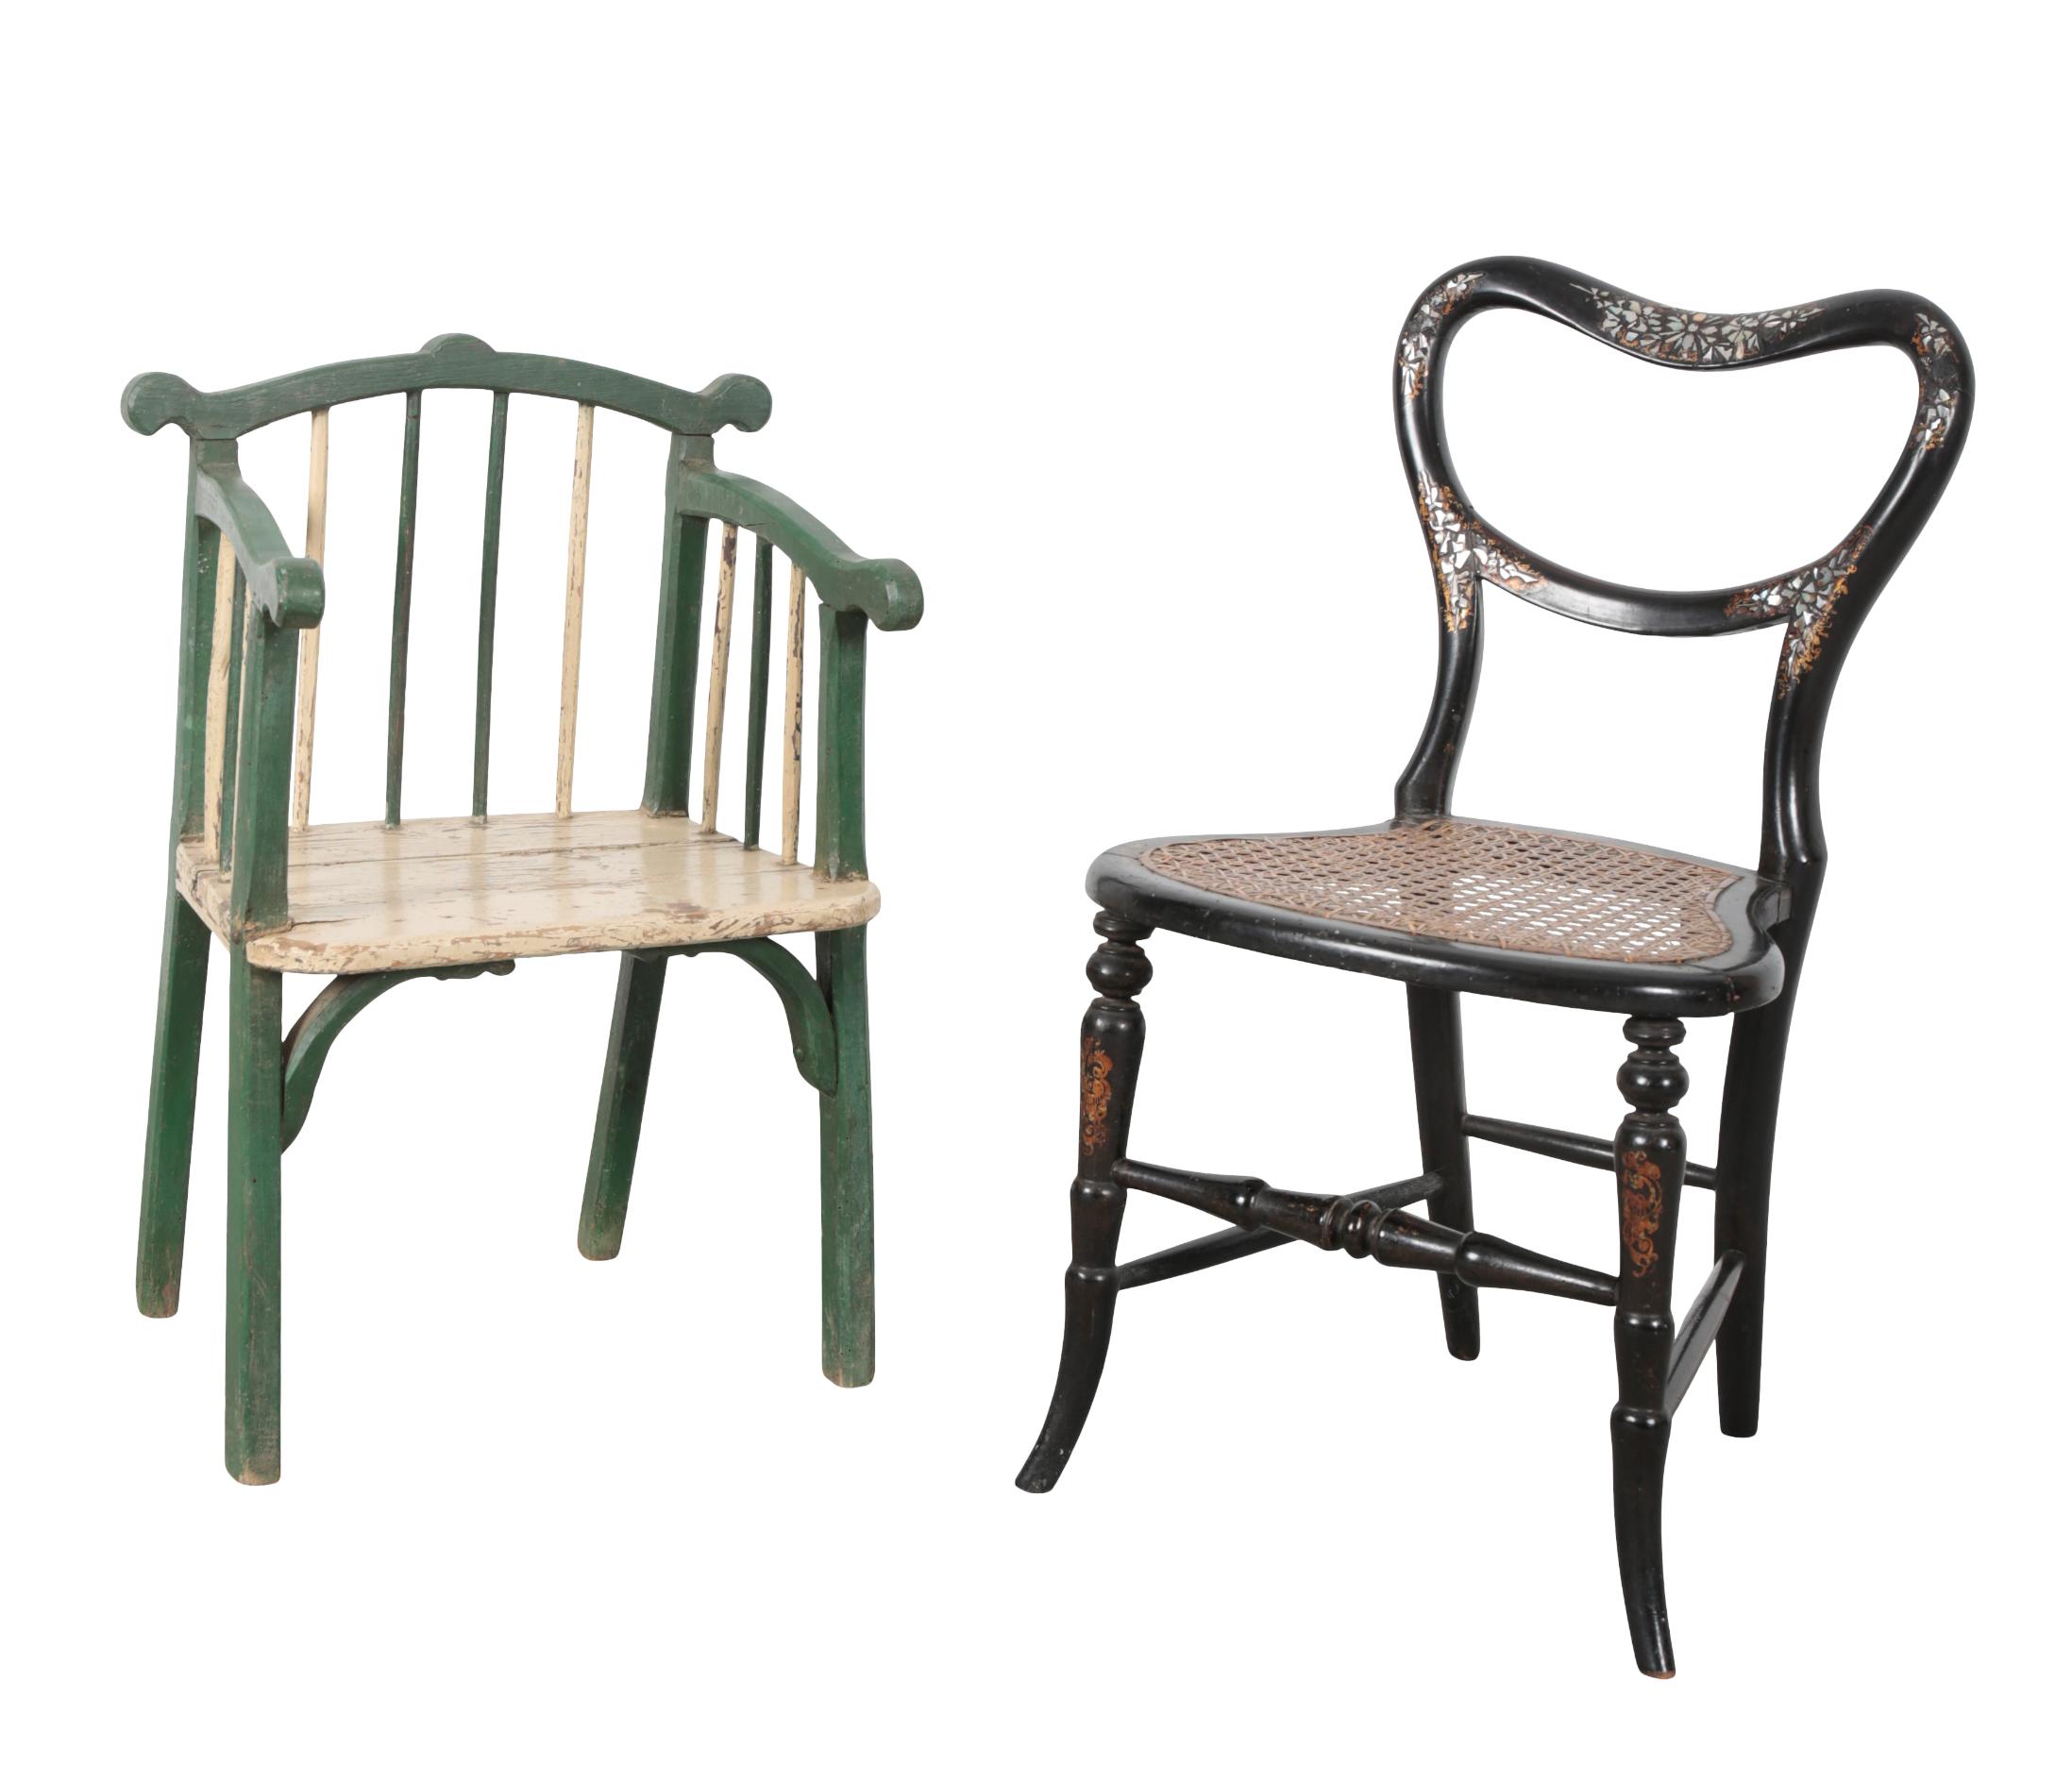 TWO CHILD'S CHAIRS including a